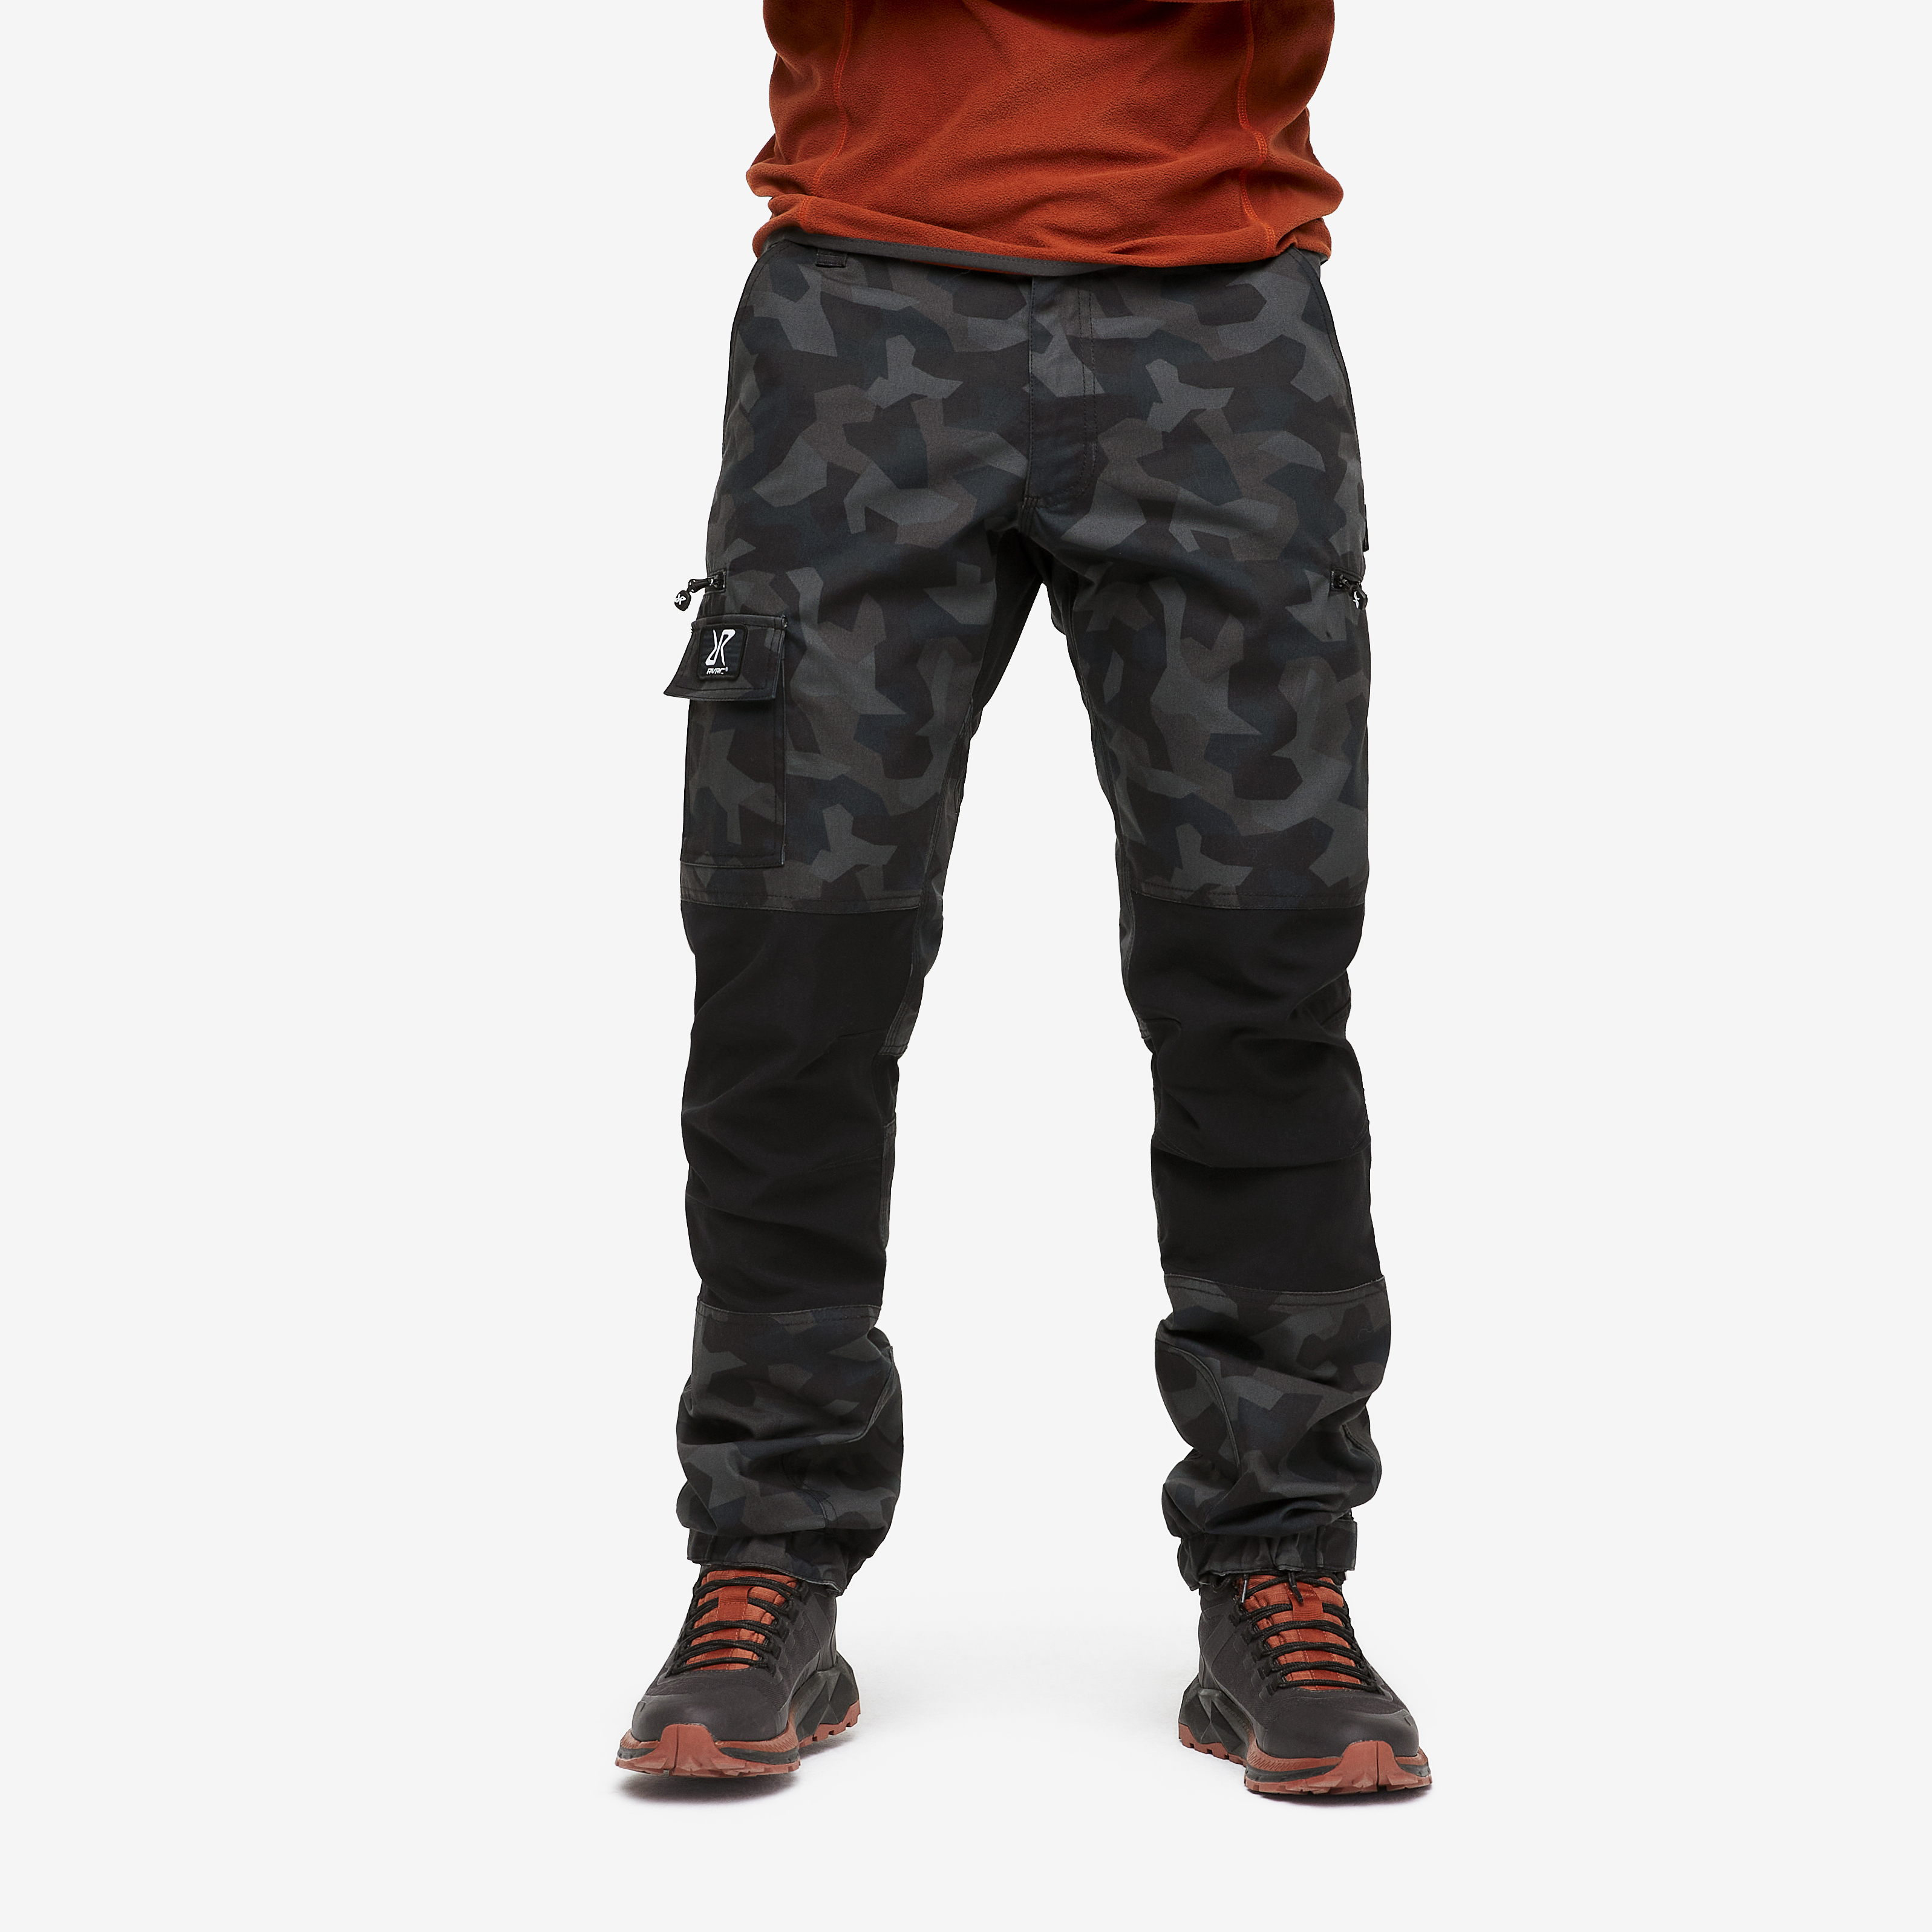 Nordwand Pants Anthracite Camo Herre